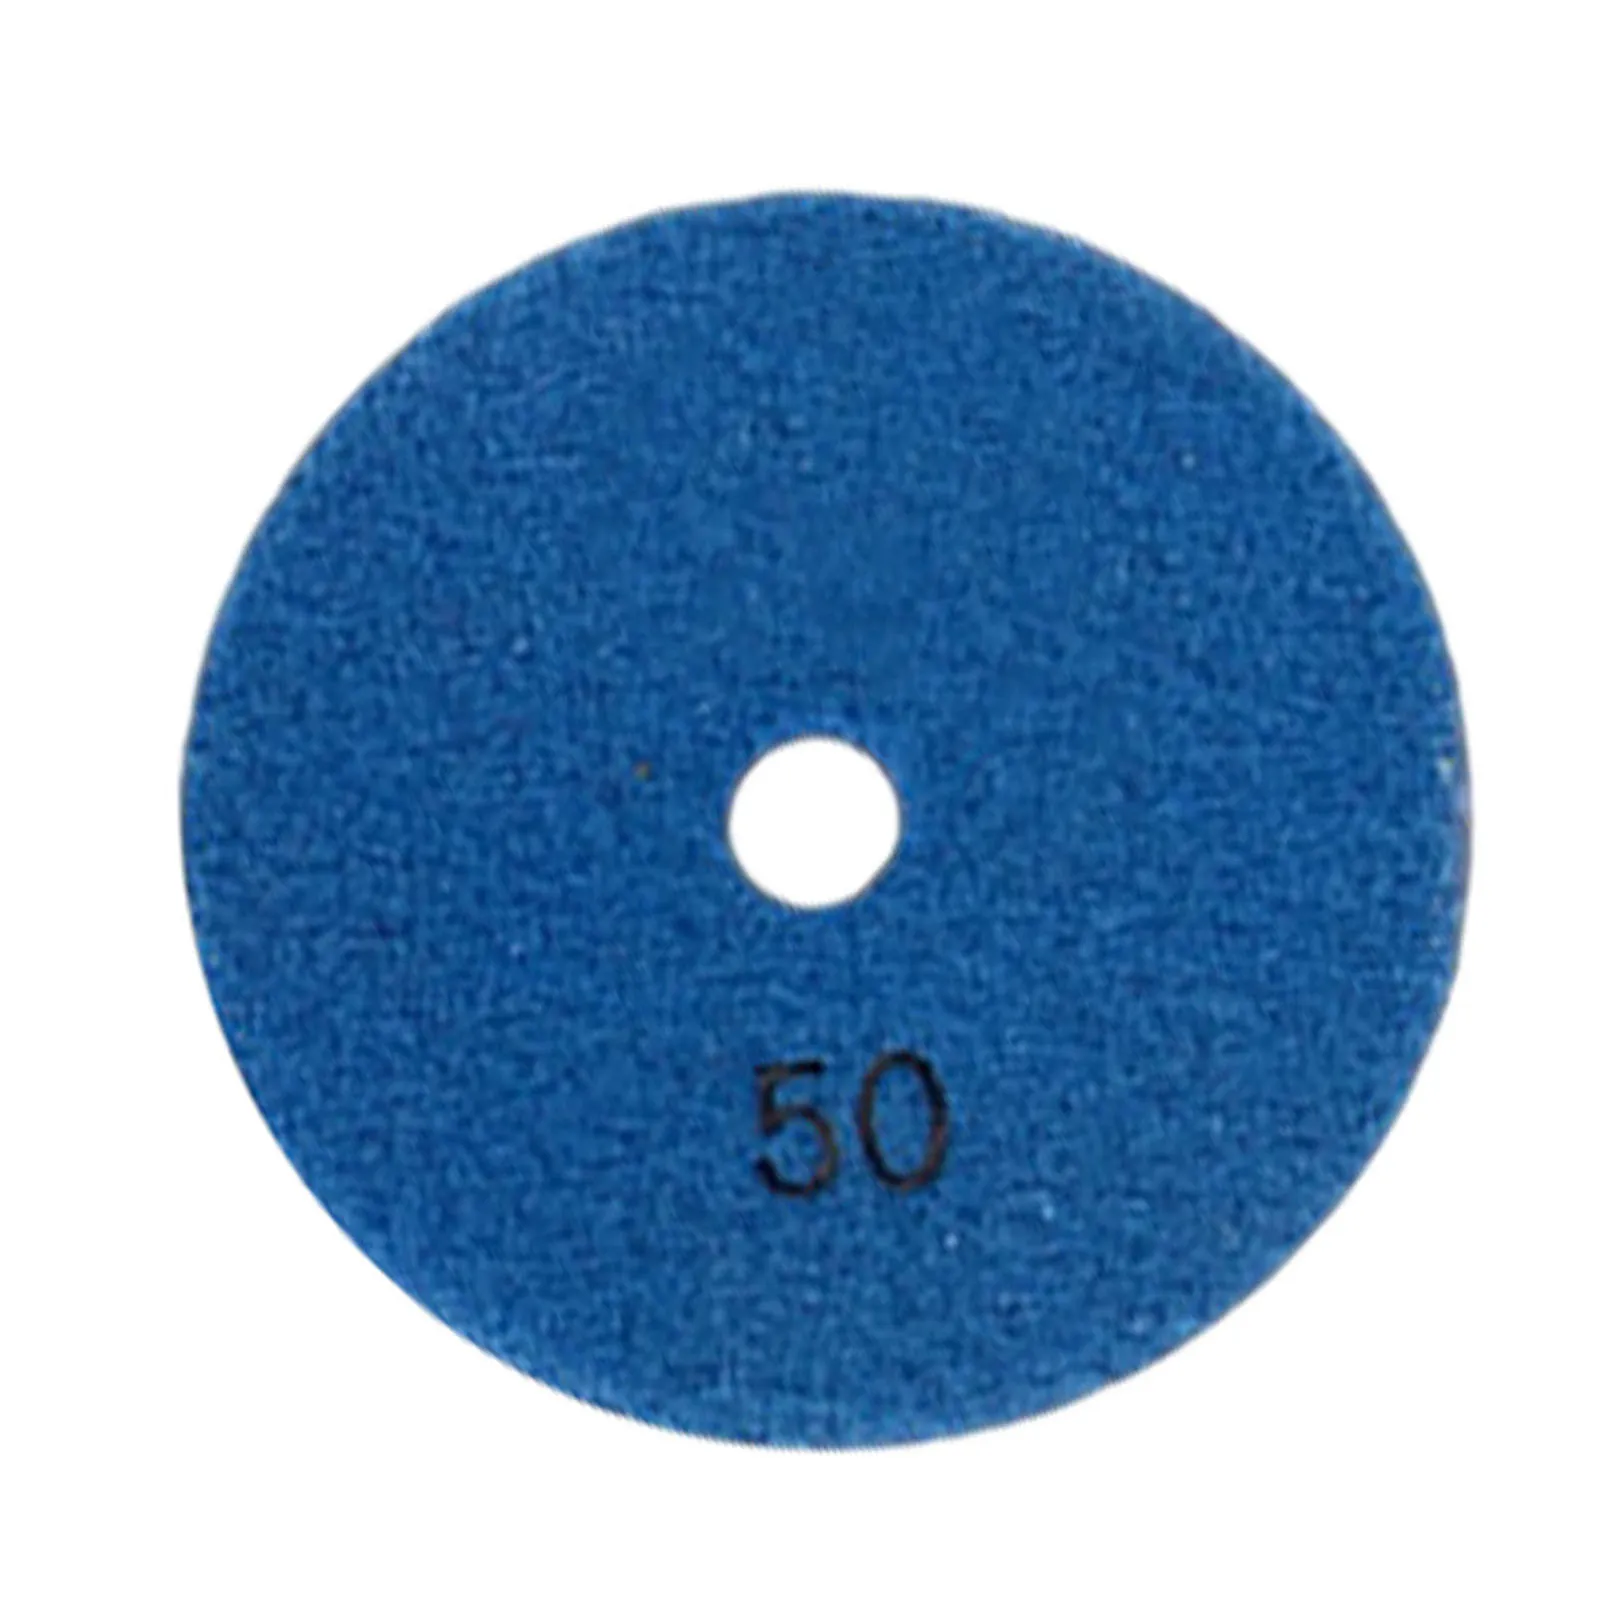 1pc 100mm Diamond Polishing Pad 4 Wet Dry Buff Disc Abrasive For Sanding Marble Granite Concrete Grinding Countertop Stone 3 inch 80mm 4 inch 100mm white buff black buff green buff diamond resin dry polishing pad for stone